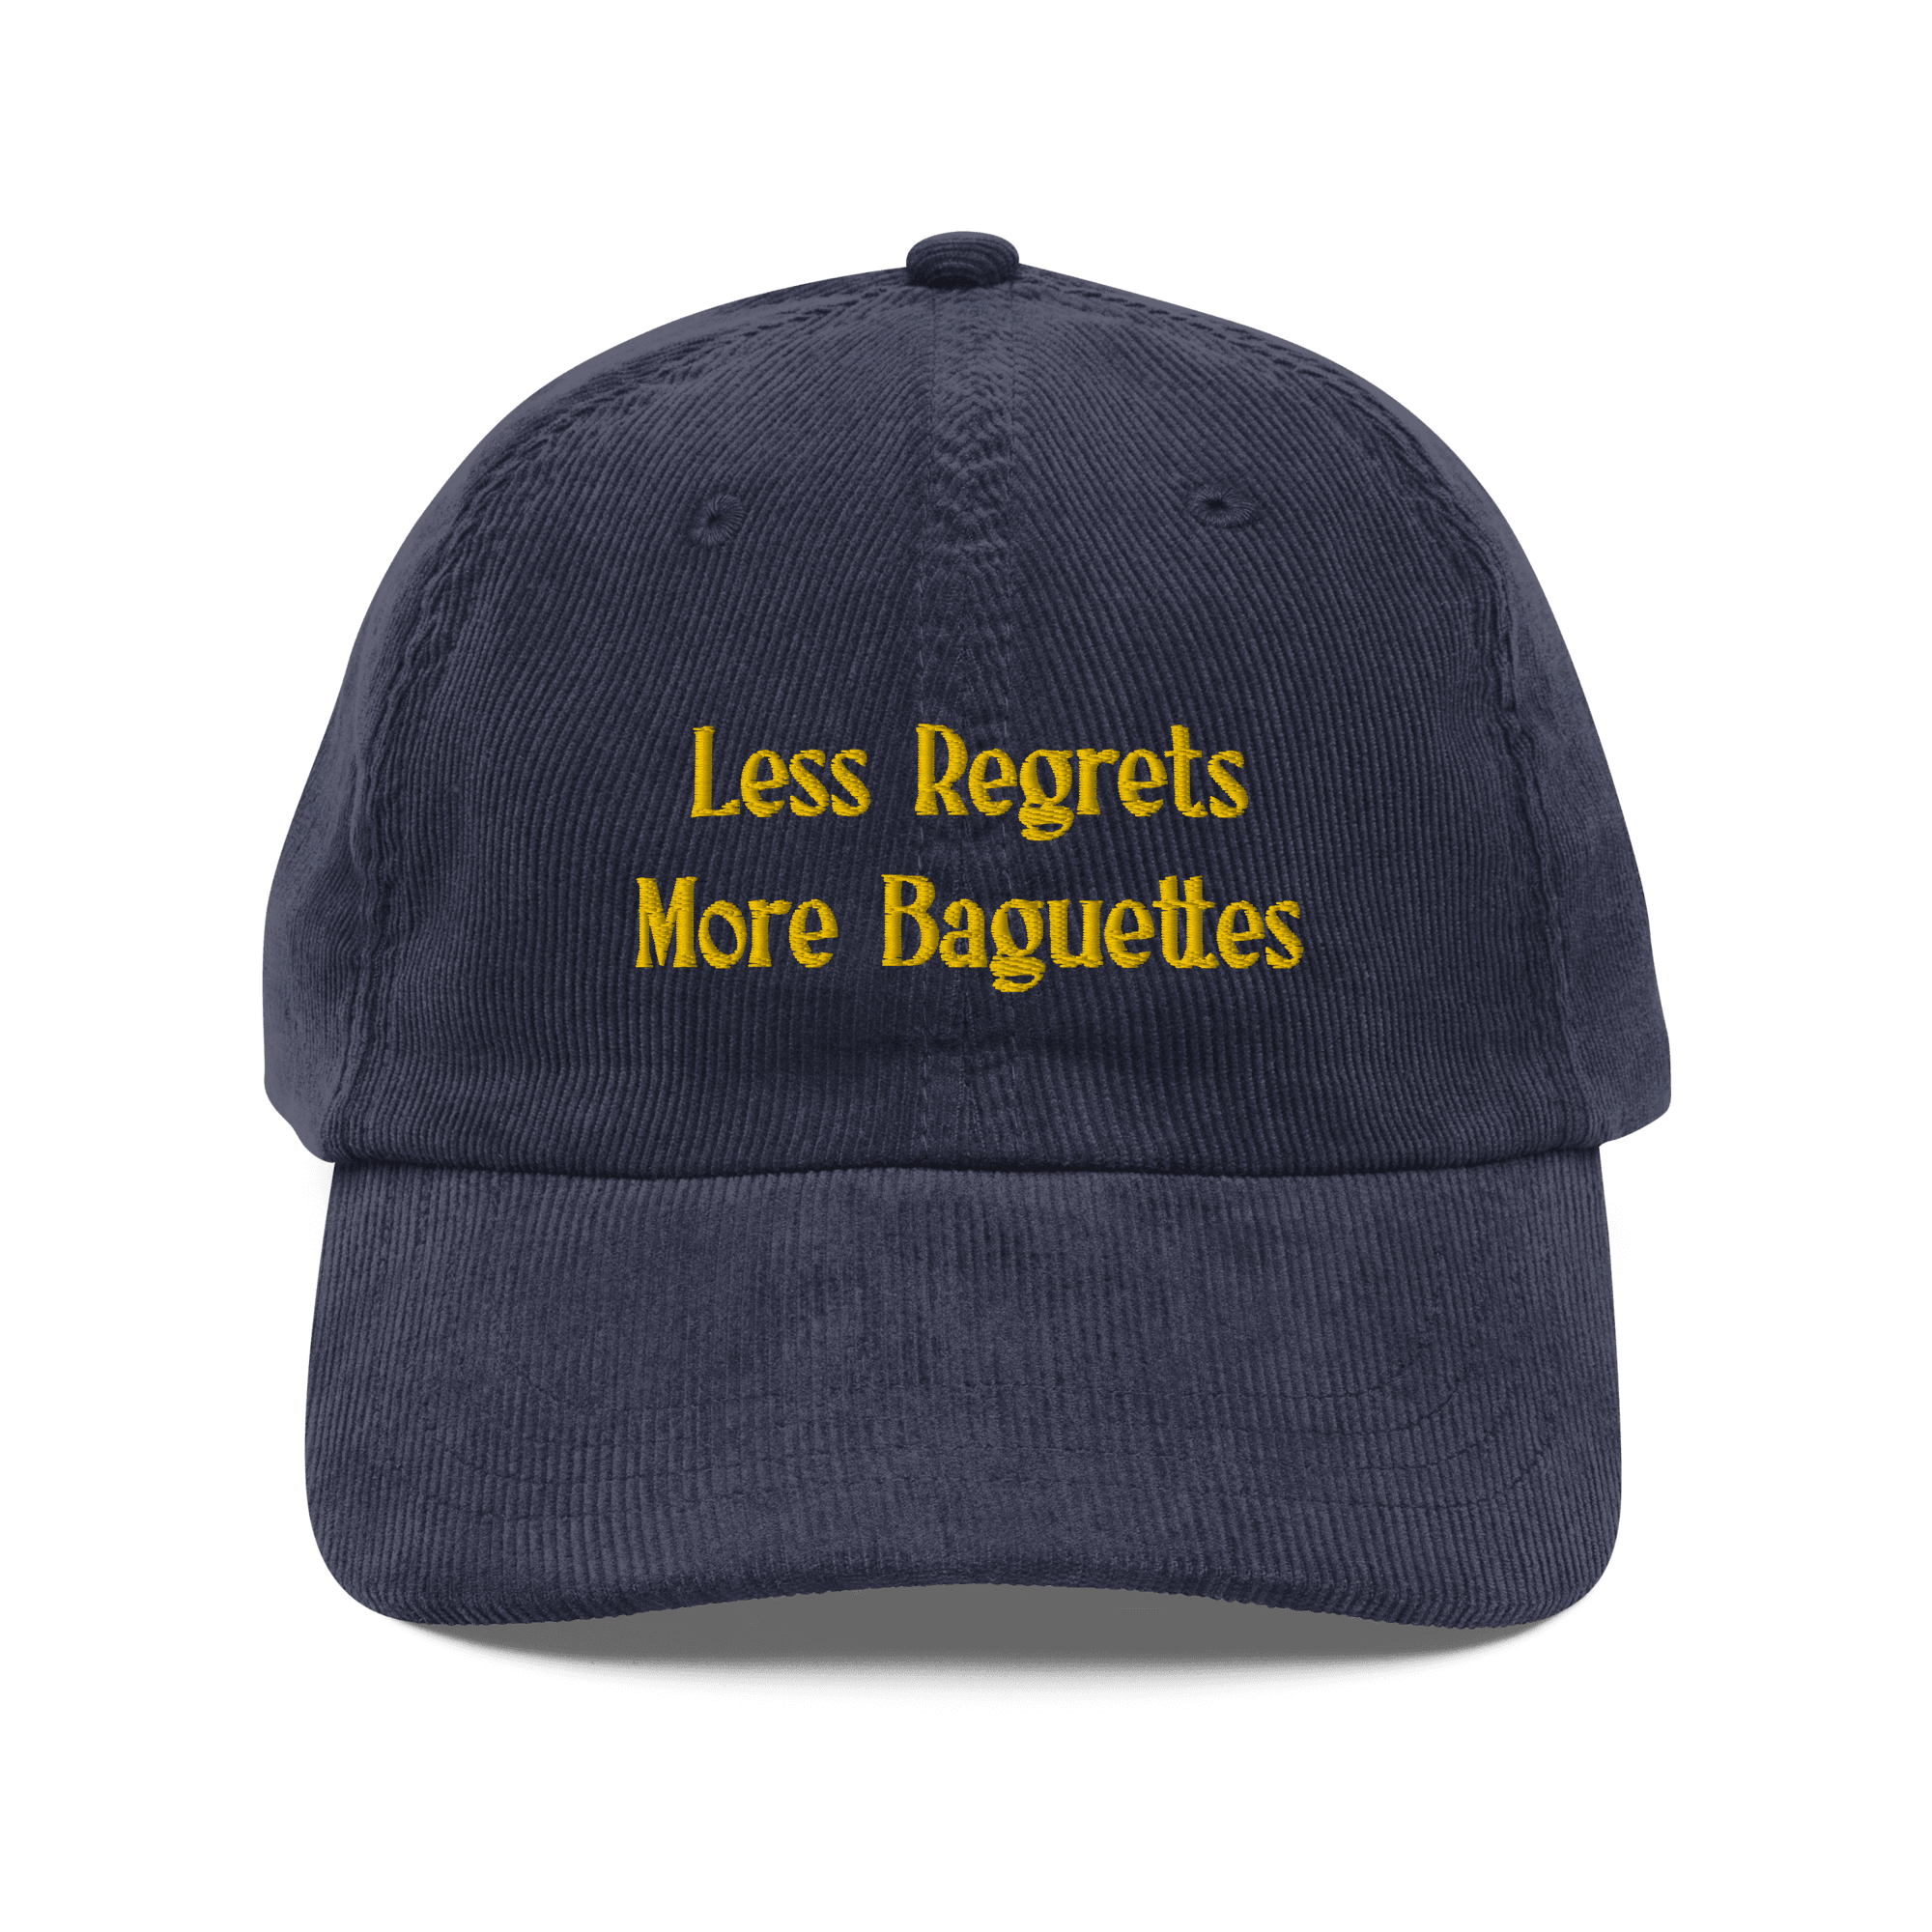 Less Regrets, More Baguettes Embroidered Hat - Polychrome Goods 🍊